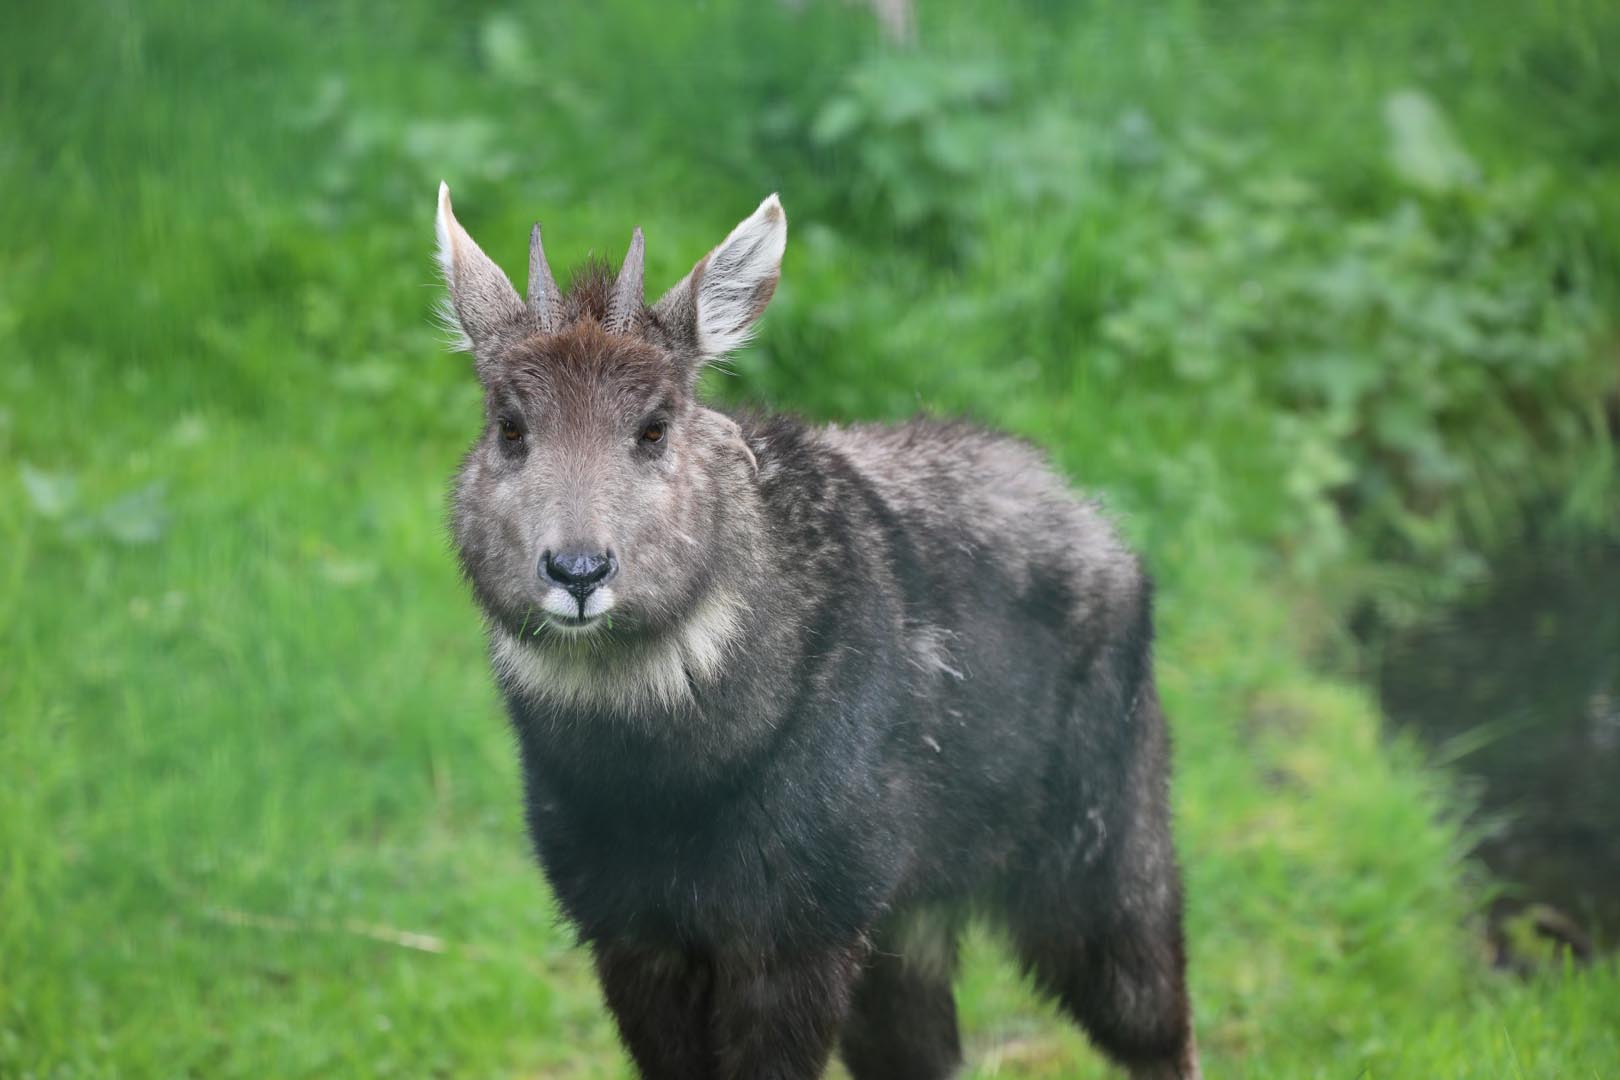 Chinese goral Danling standing on grass looking to camera (eye contact) Image: Amy Middleton 2022